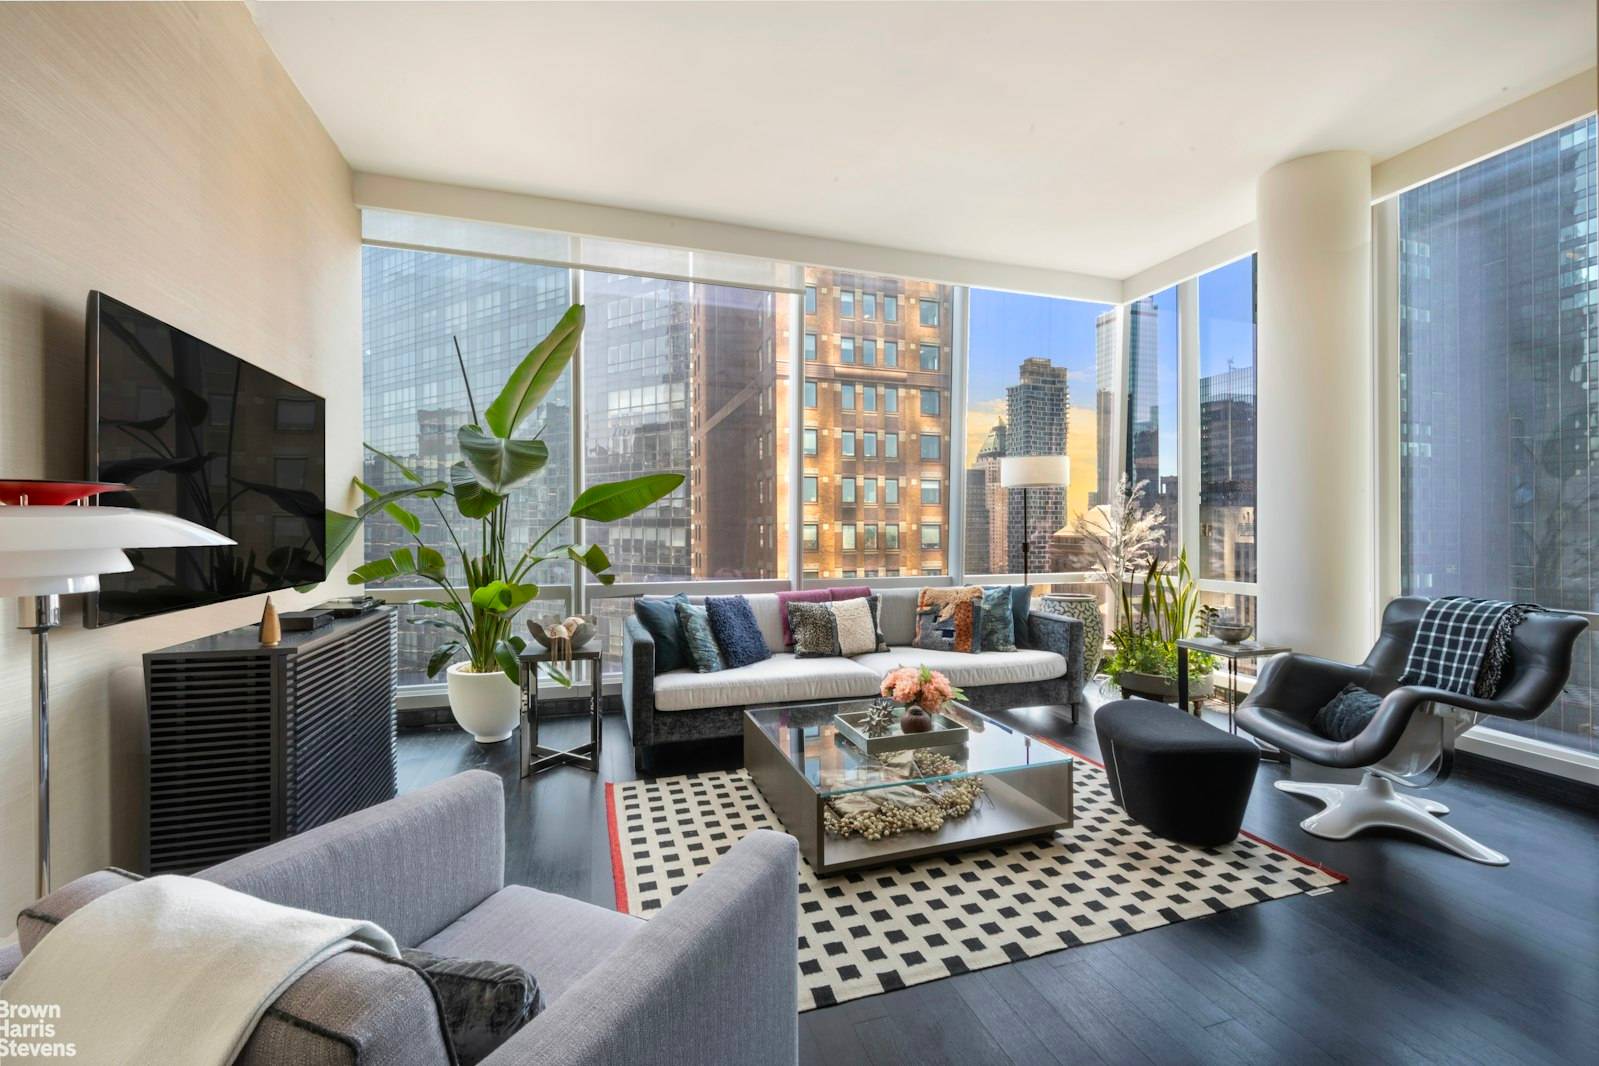 Welcome to One57 38APerched above the prestigious 5 star Park Hyatt, this exceptional 1 Bedroom 2 Bath residence at One57 offers sweeping views of Midtown Manhattan.